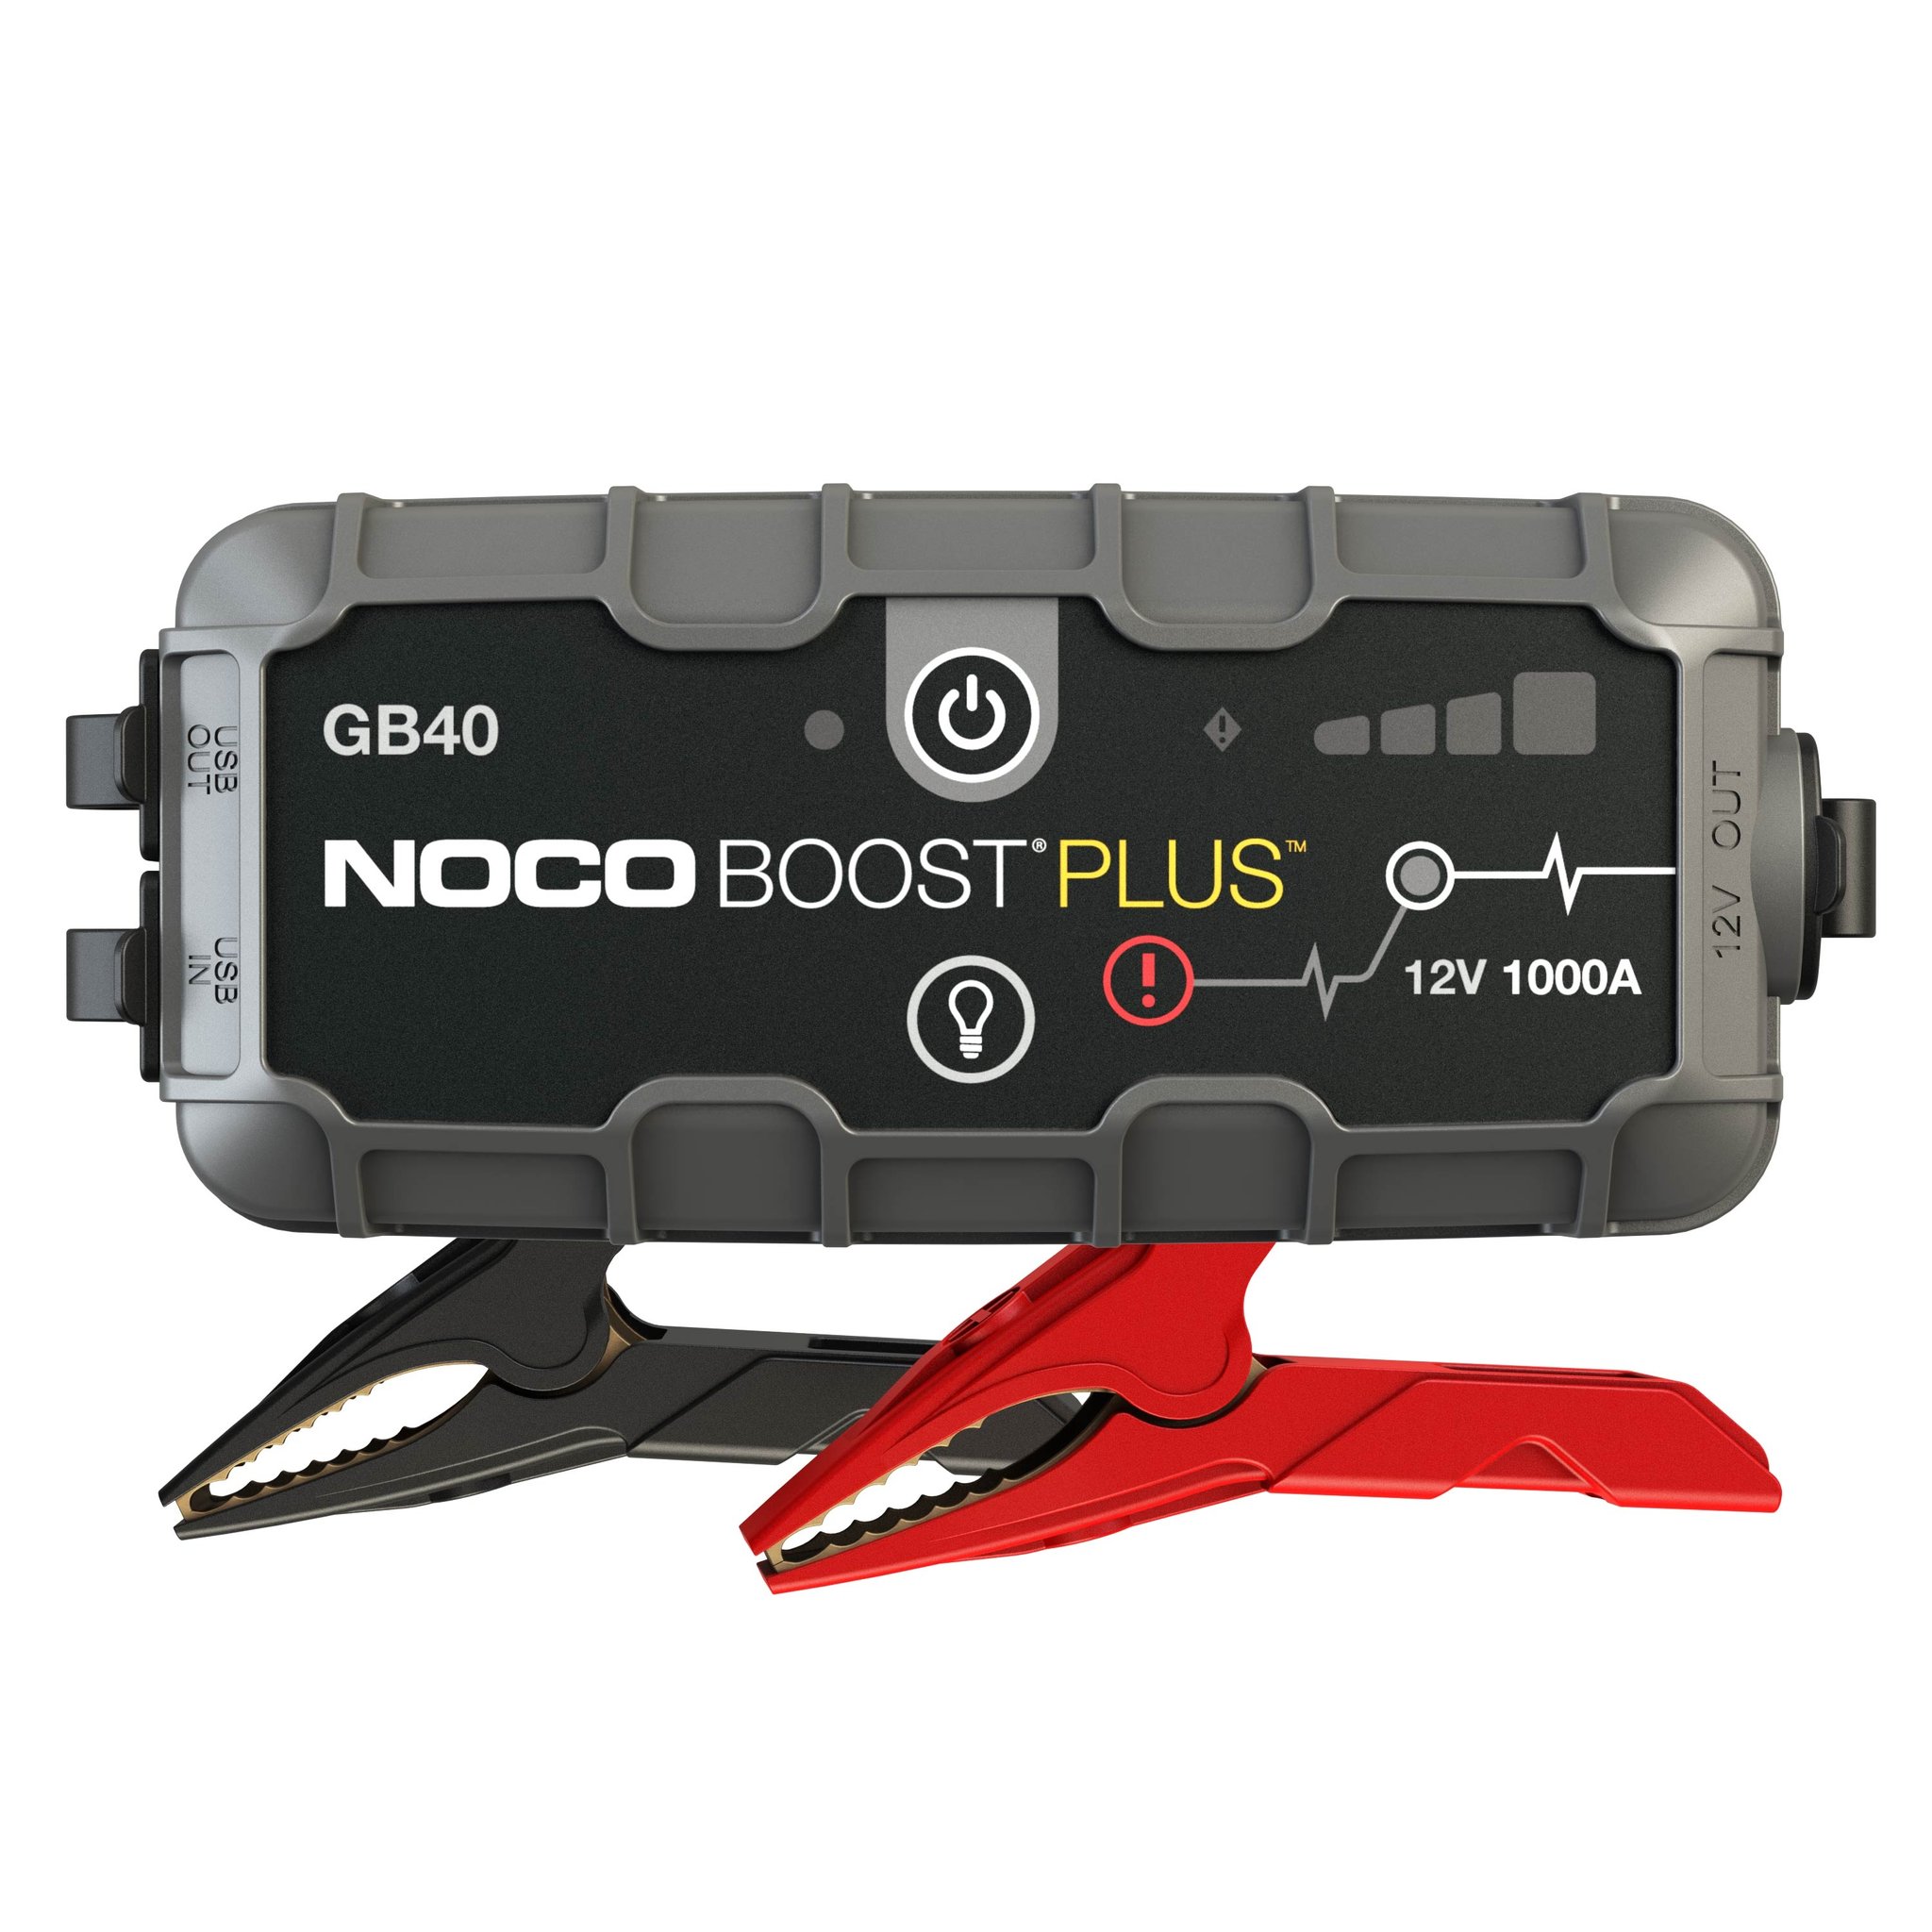 Buy Noco Boost Plus Gb40 devices online